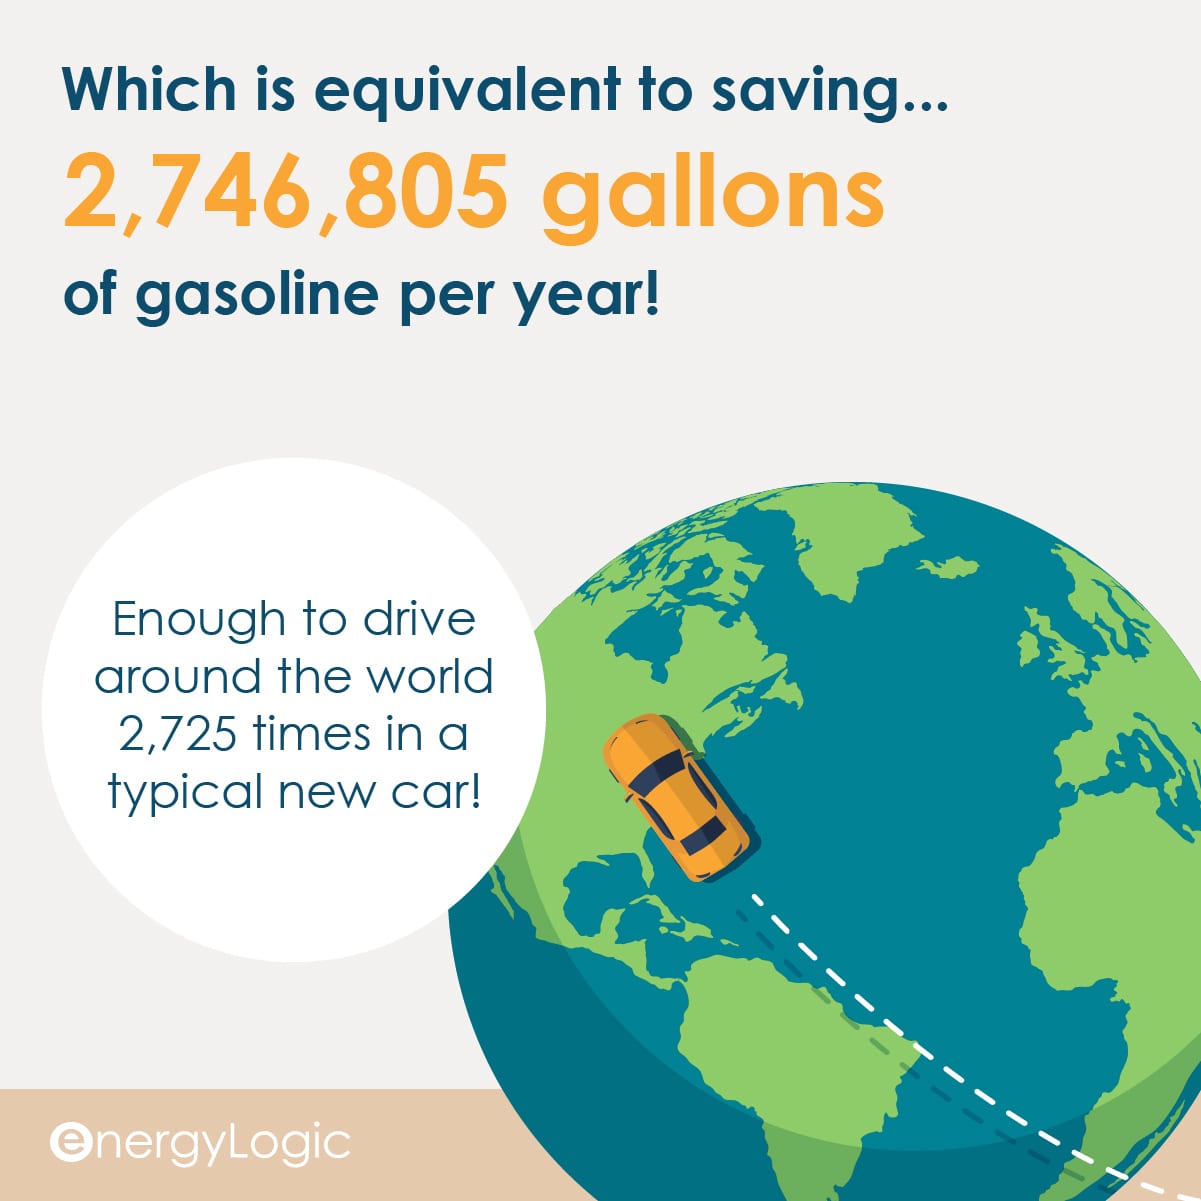 Over 2 million gallons of gasoline per year were saved by EnergyLogic's work in 2020